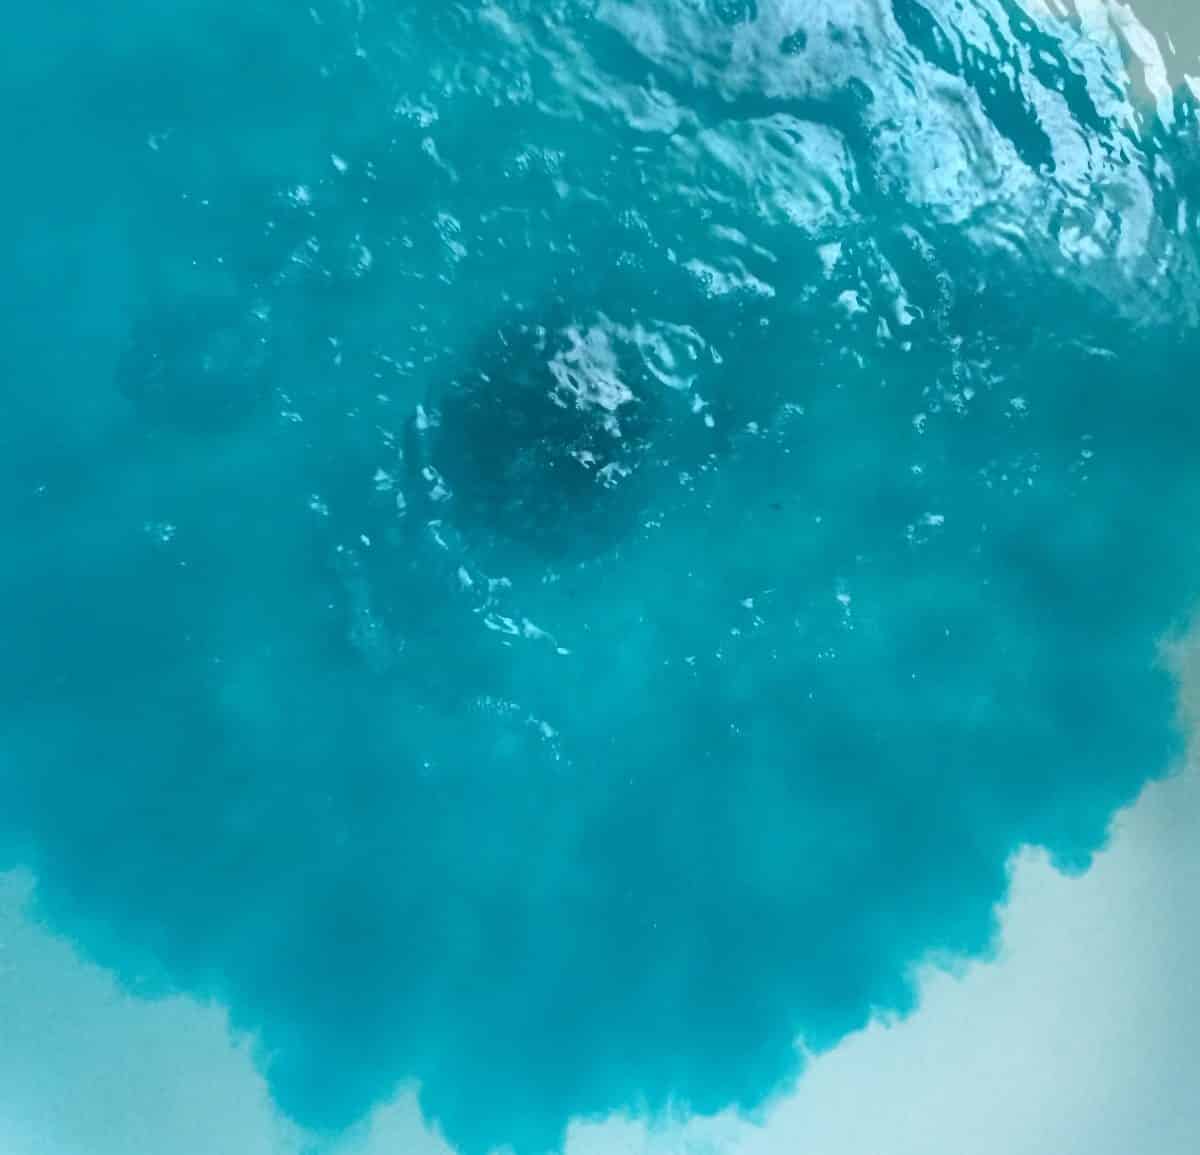 homemade bath bomb dropping into bath water and turning water sea blue